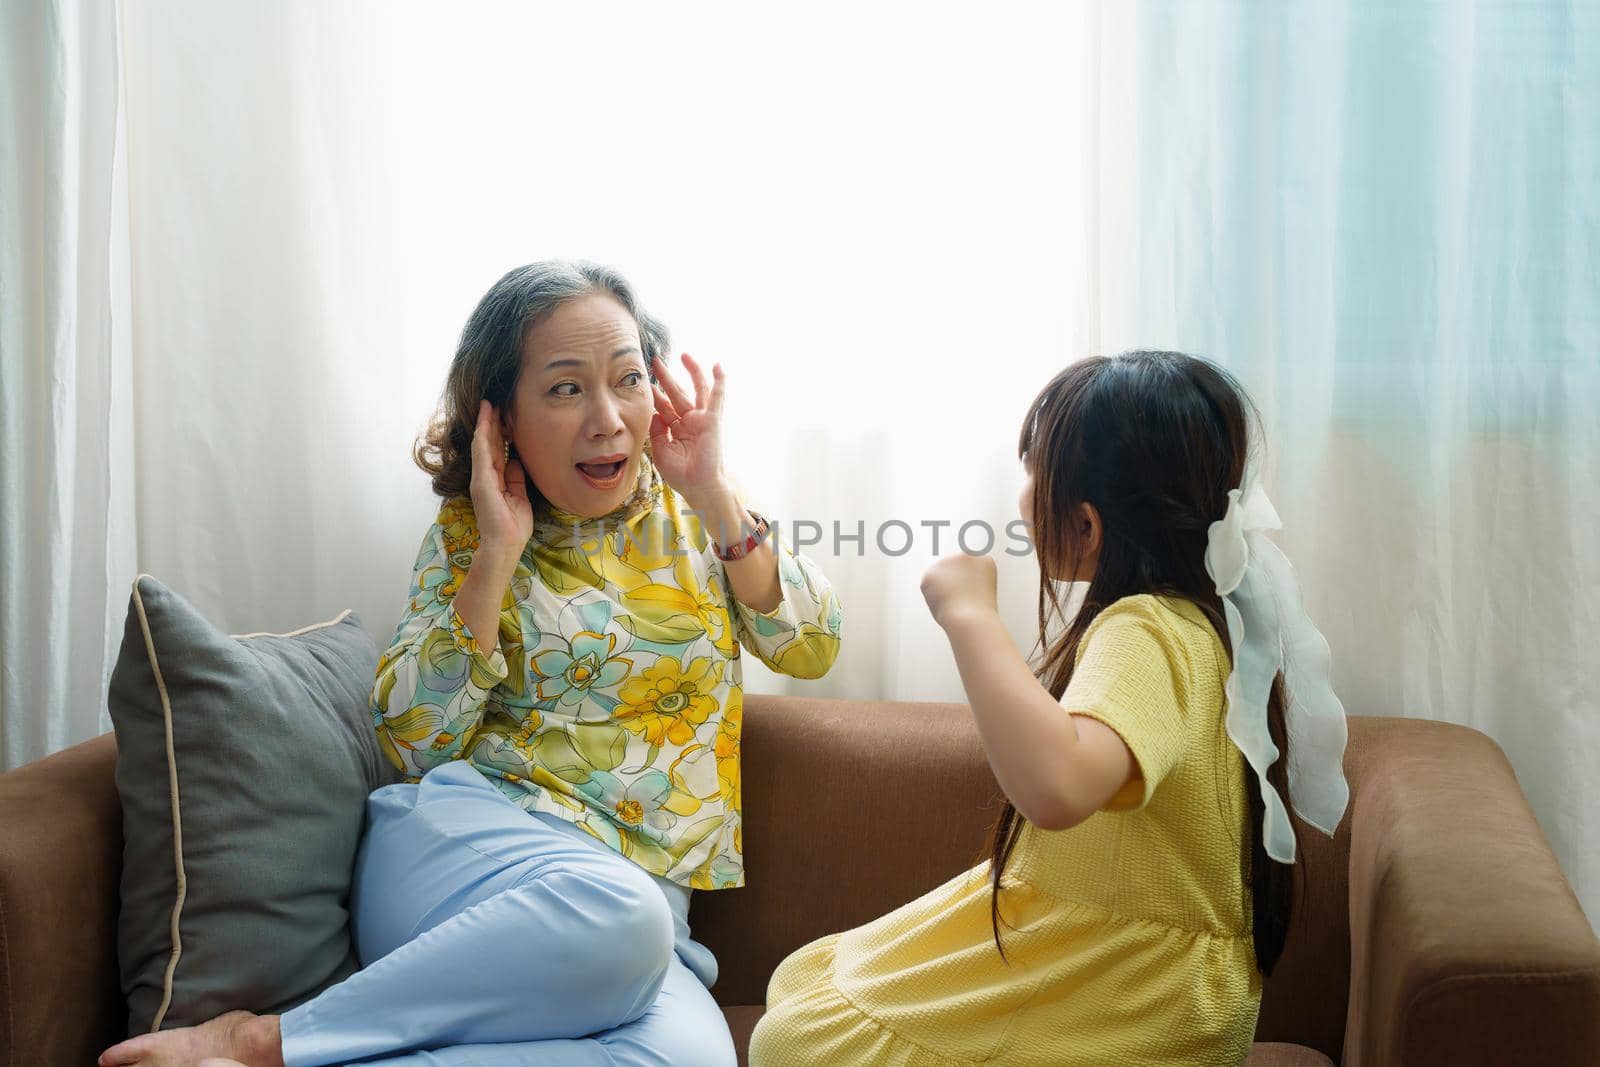 Asian portrait, granddaughter expressing displeasure by yelling at grandmother covering her ears, aggression, violence, upbringing .